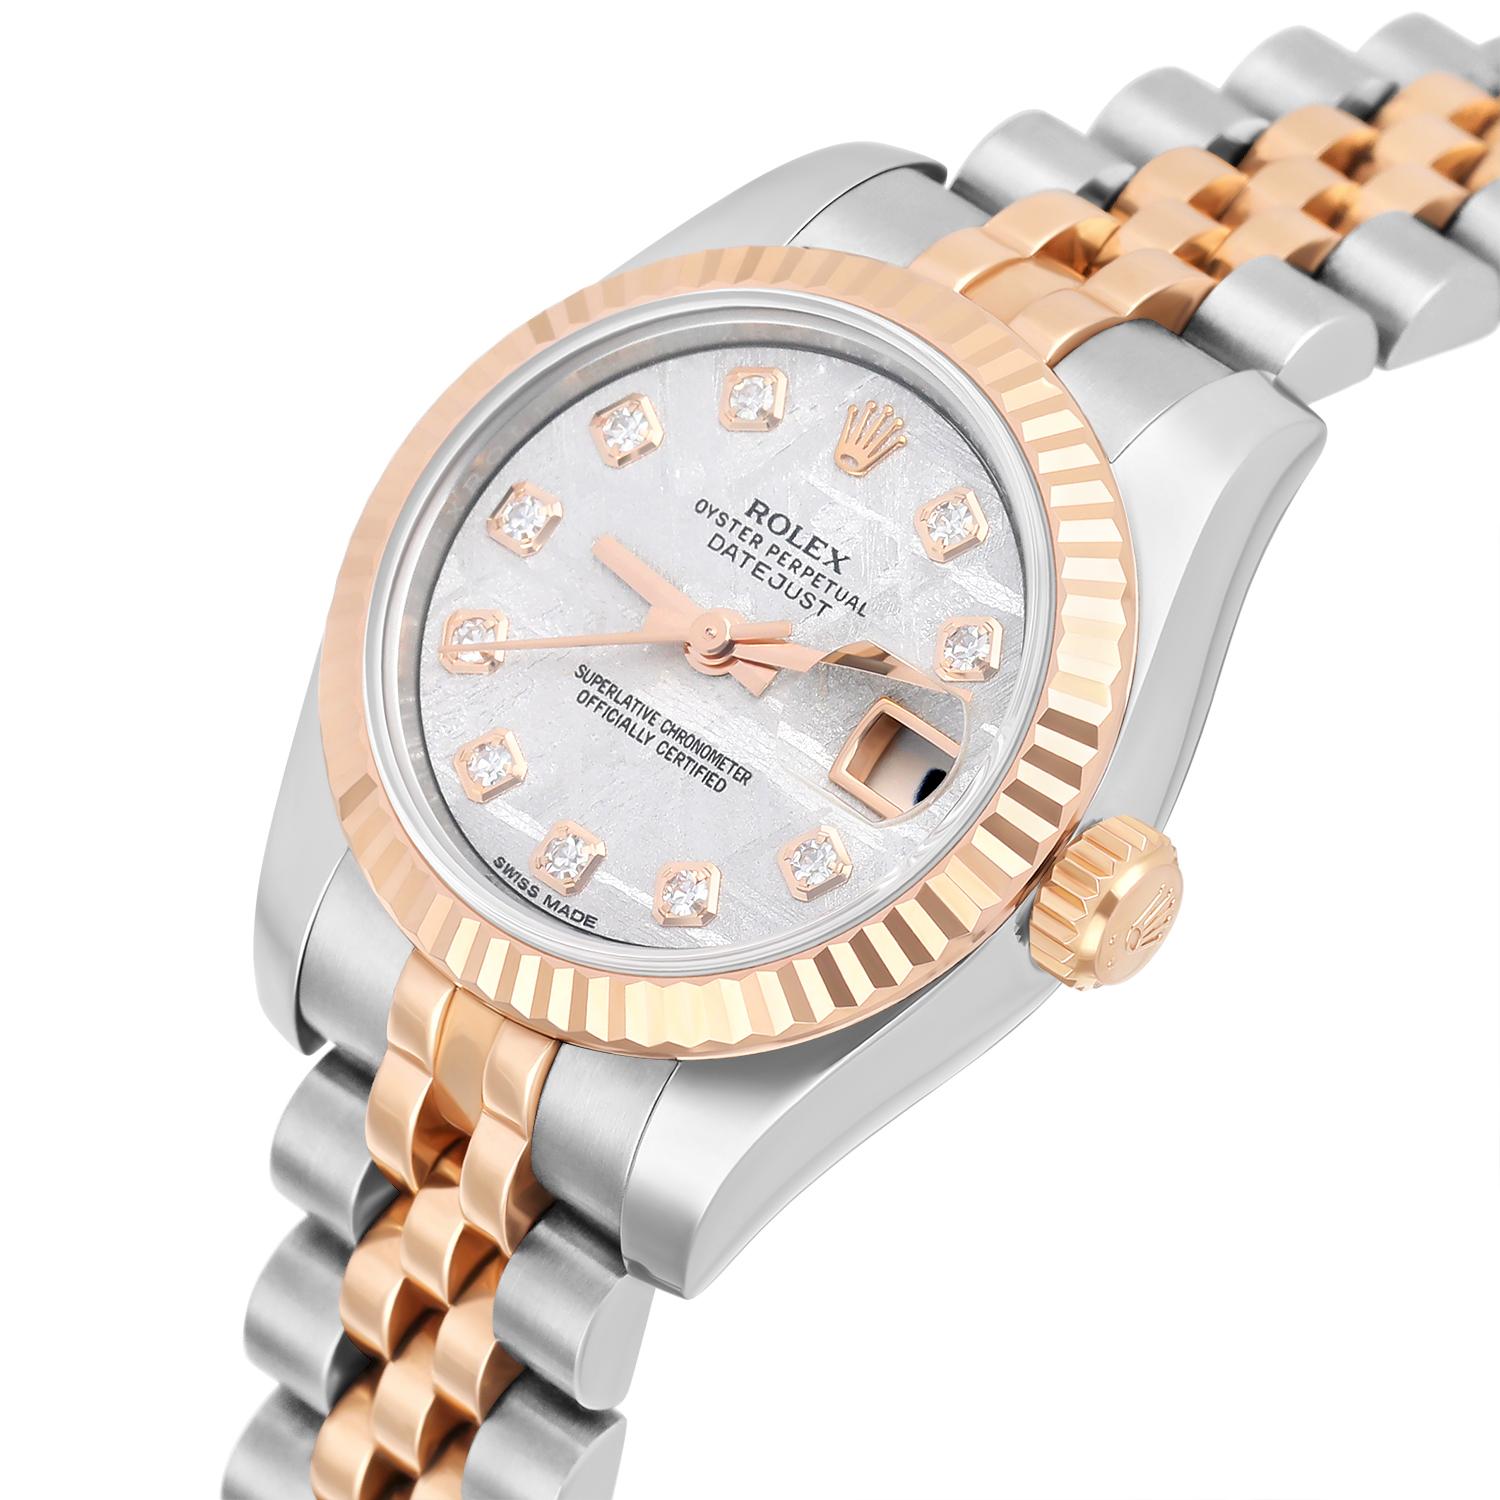 Rolex Lady-Datejust 26mm Stainless Steel & Rose Gold 179171 Meteorite Diamond For Sale 1